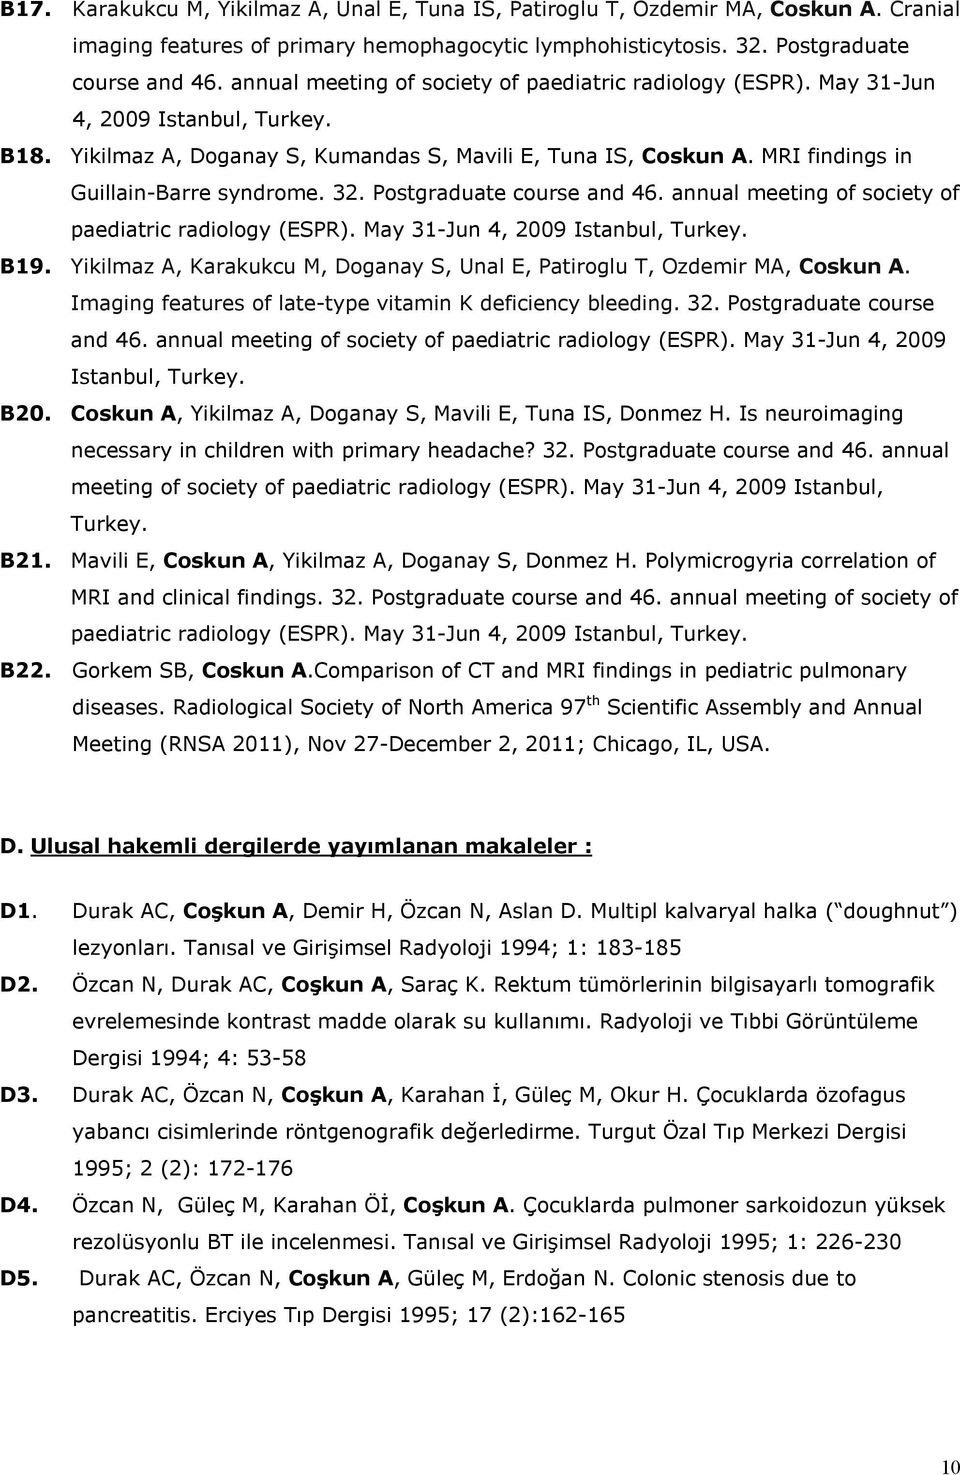 MRI findings in Guillain-Barre syndrome. 32. Postgraduate course and 46. annual meeting of society of paediatric radiology (ESPR). May 31-Jun 4, 2009 Istanbul, Turkey. B19.